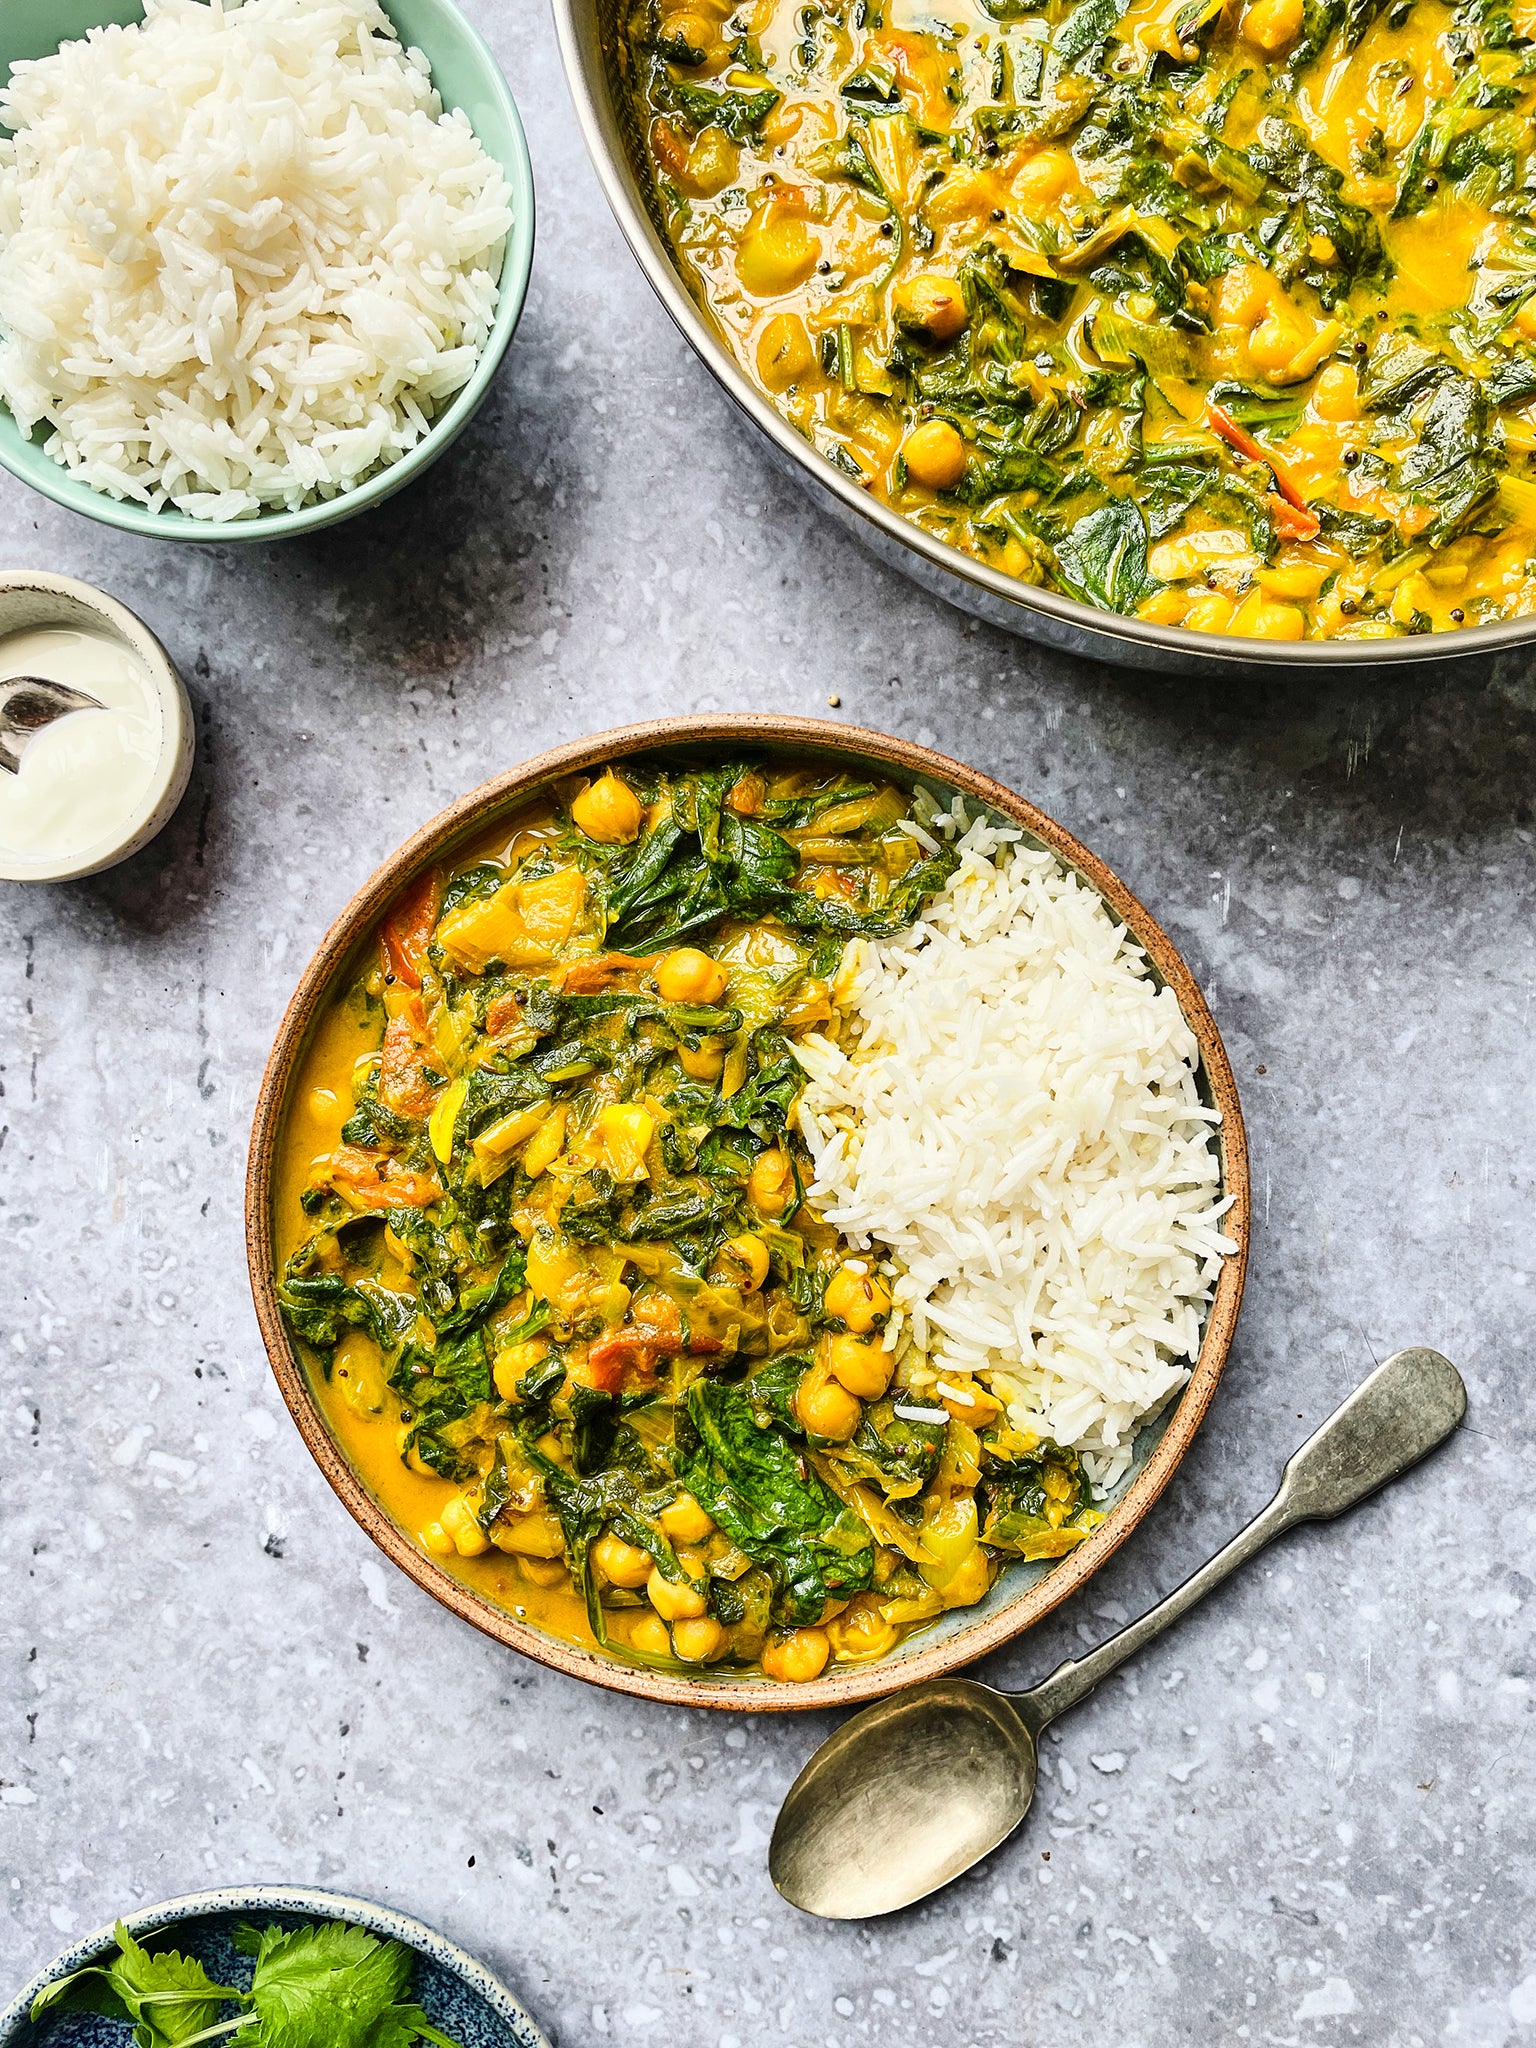 For those looking for an easy yet nutritious Monday night dinner, saag channa masala is a tasty plant-based option.